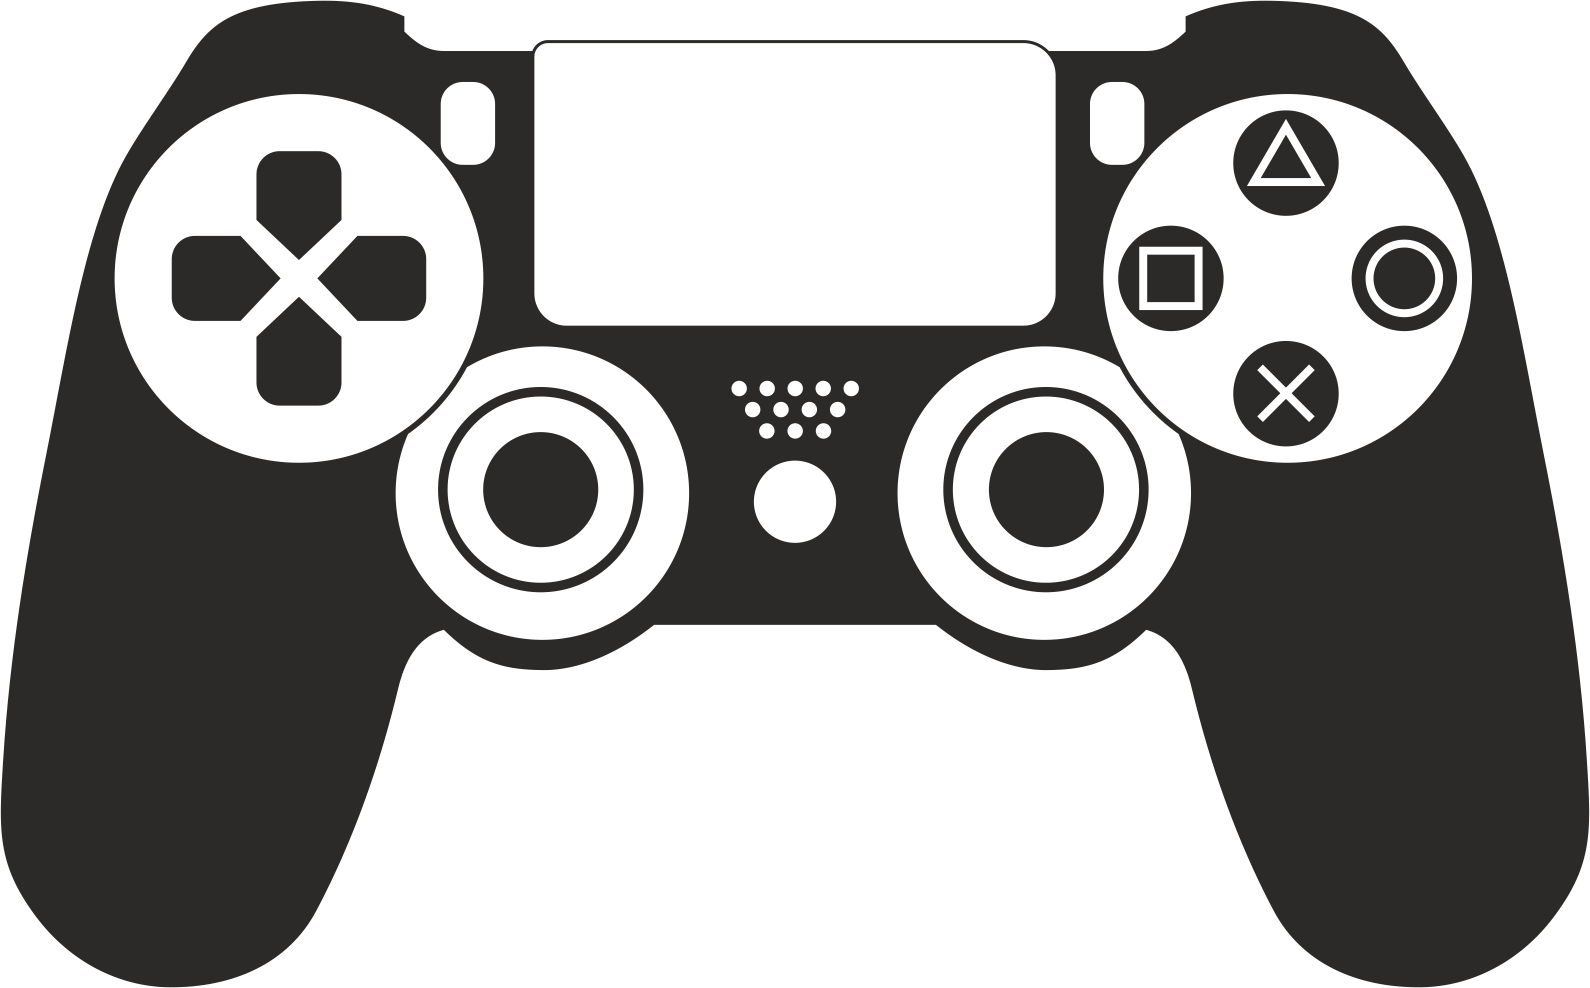 Ps4 Controller Vector - Ps4 Controller Icon Vector - Free ... - 1590 x 988 png 133kB